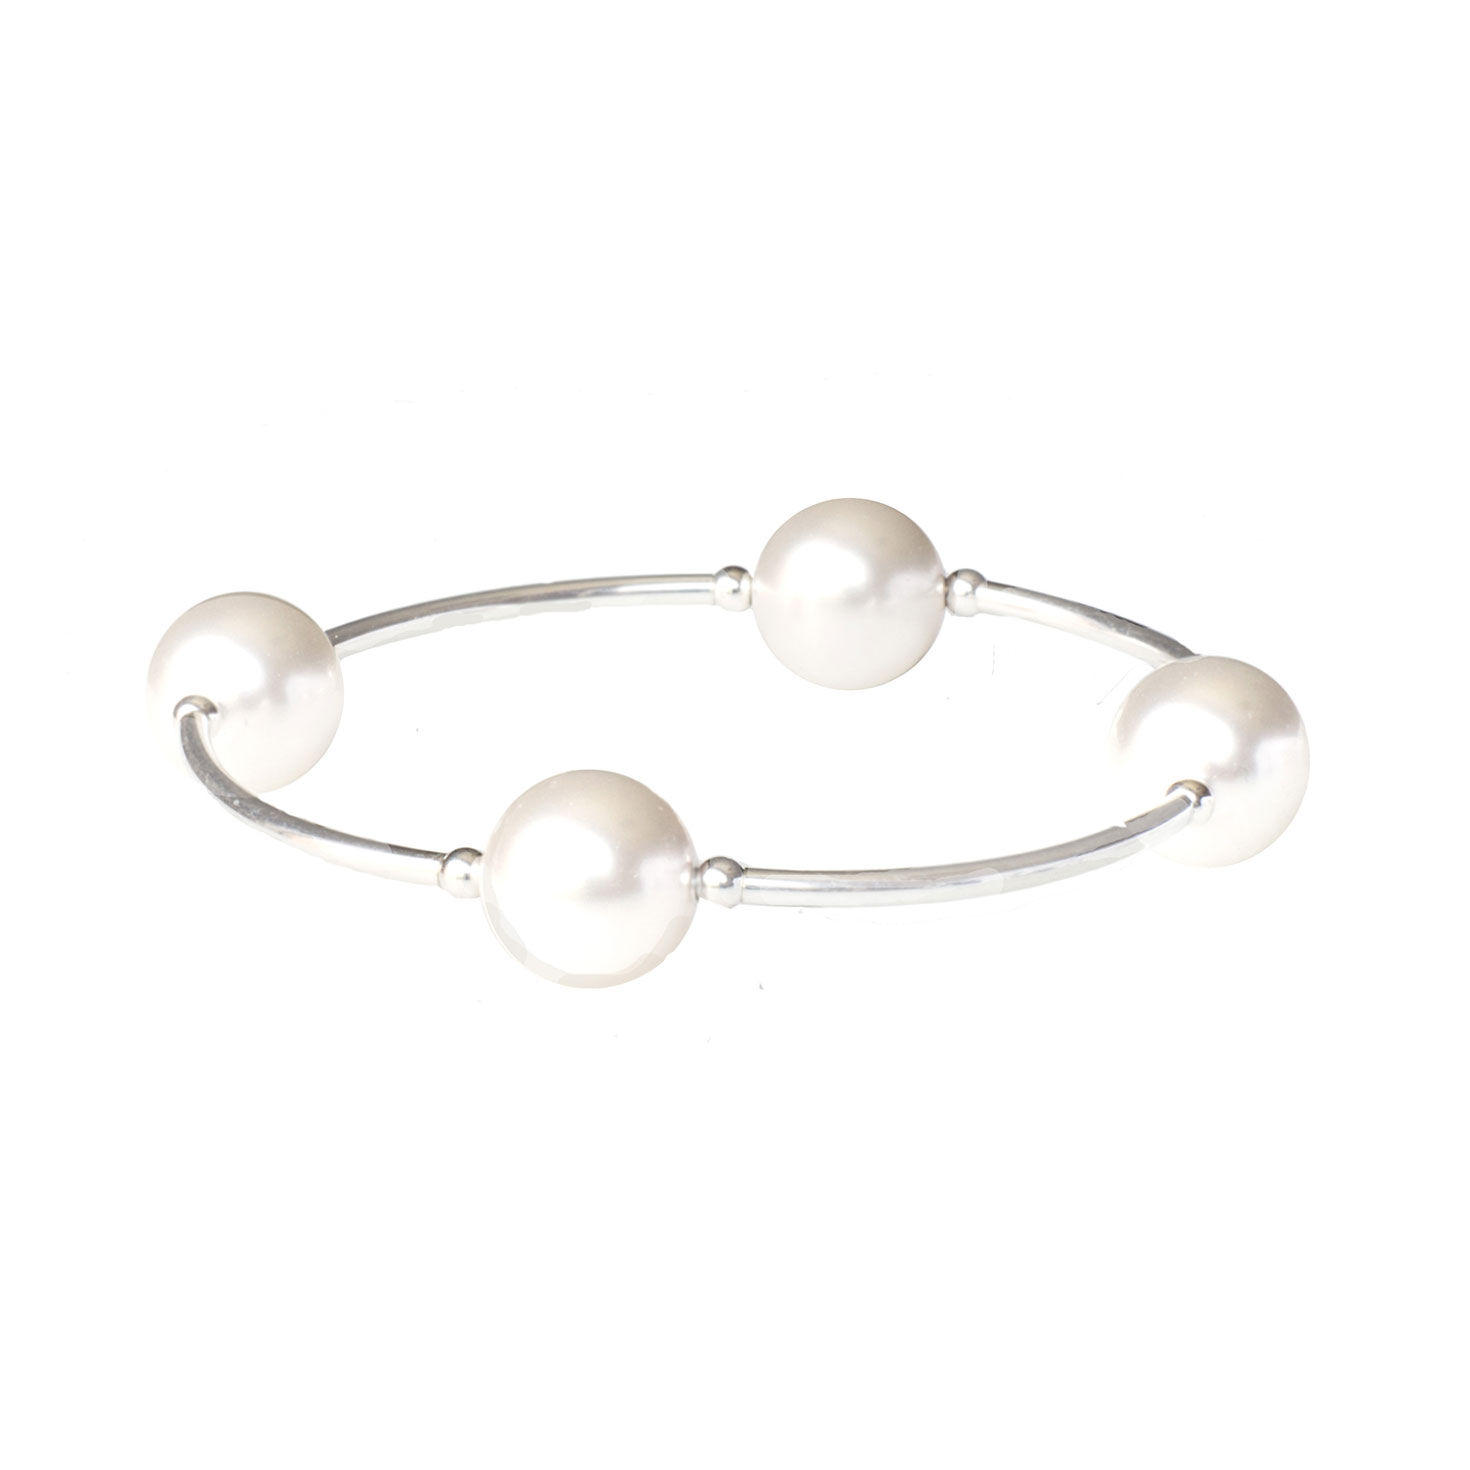 Made As Intended White Pearl Blessing Bracelet - Jewelry - Hallmark